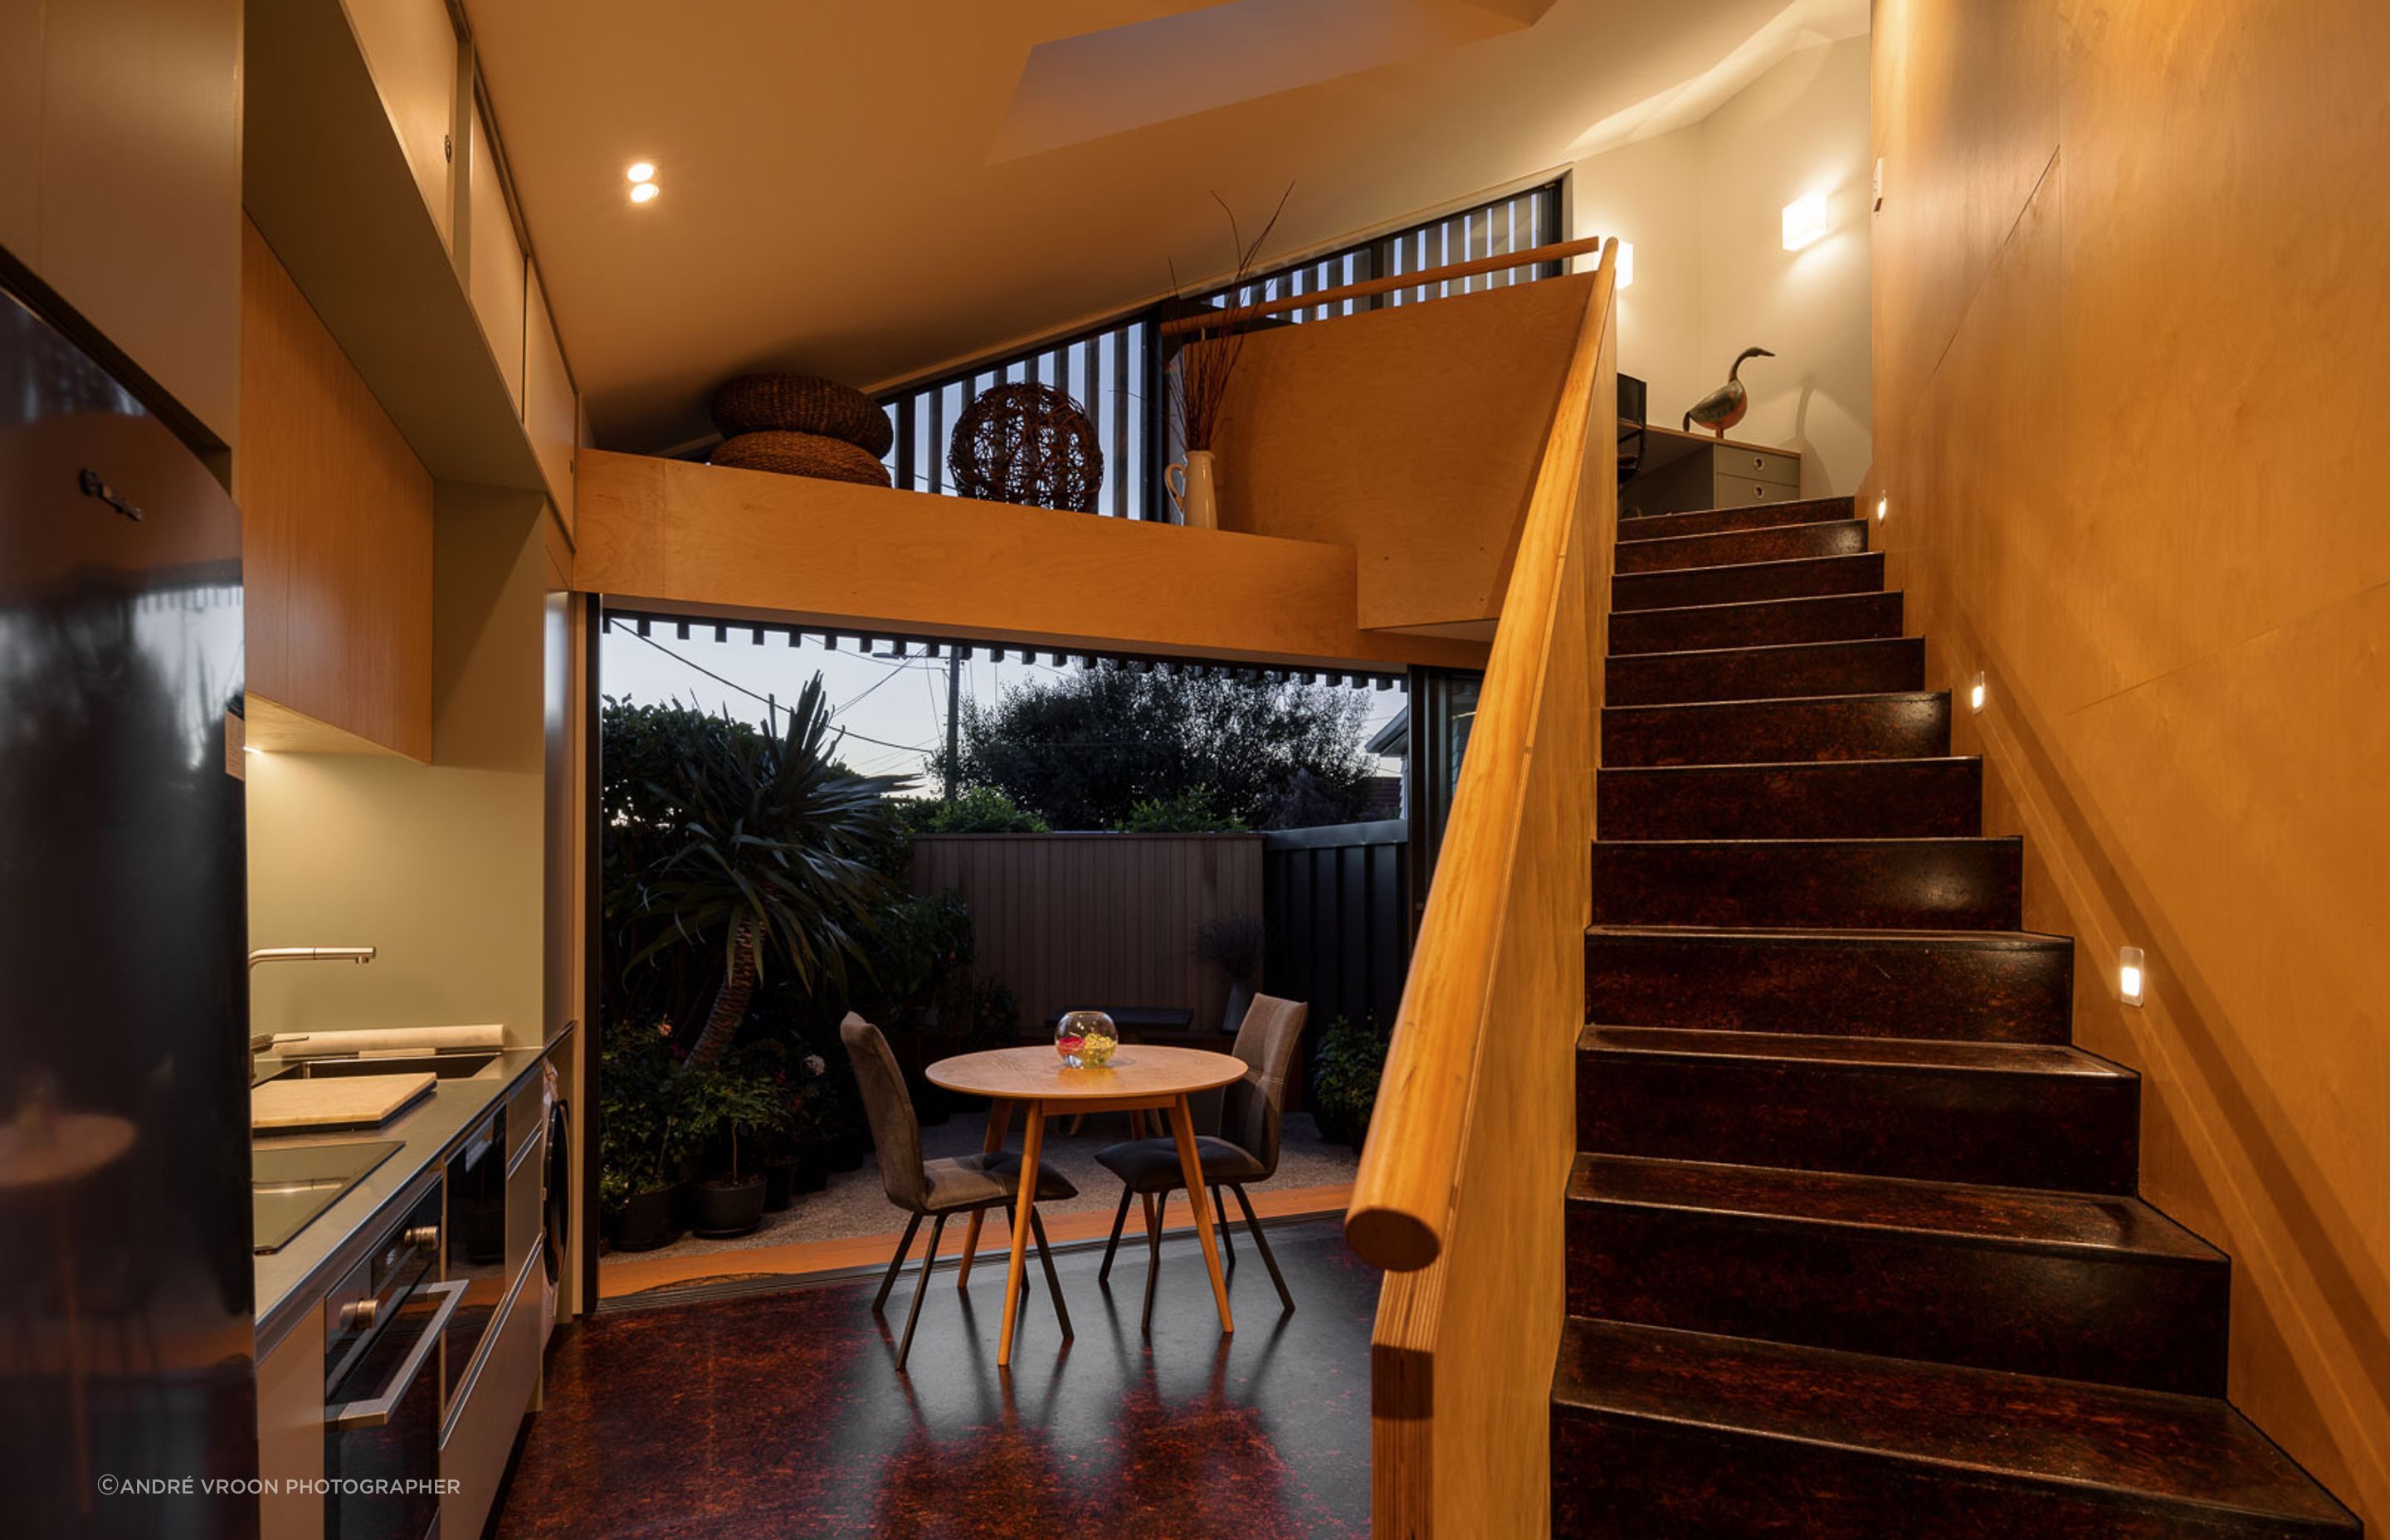 The staircase forms the spine of the home, with triangular spaces fanning out from it.